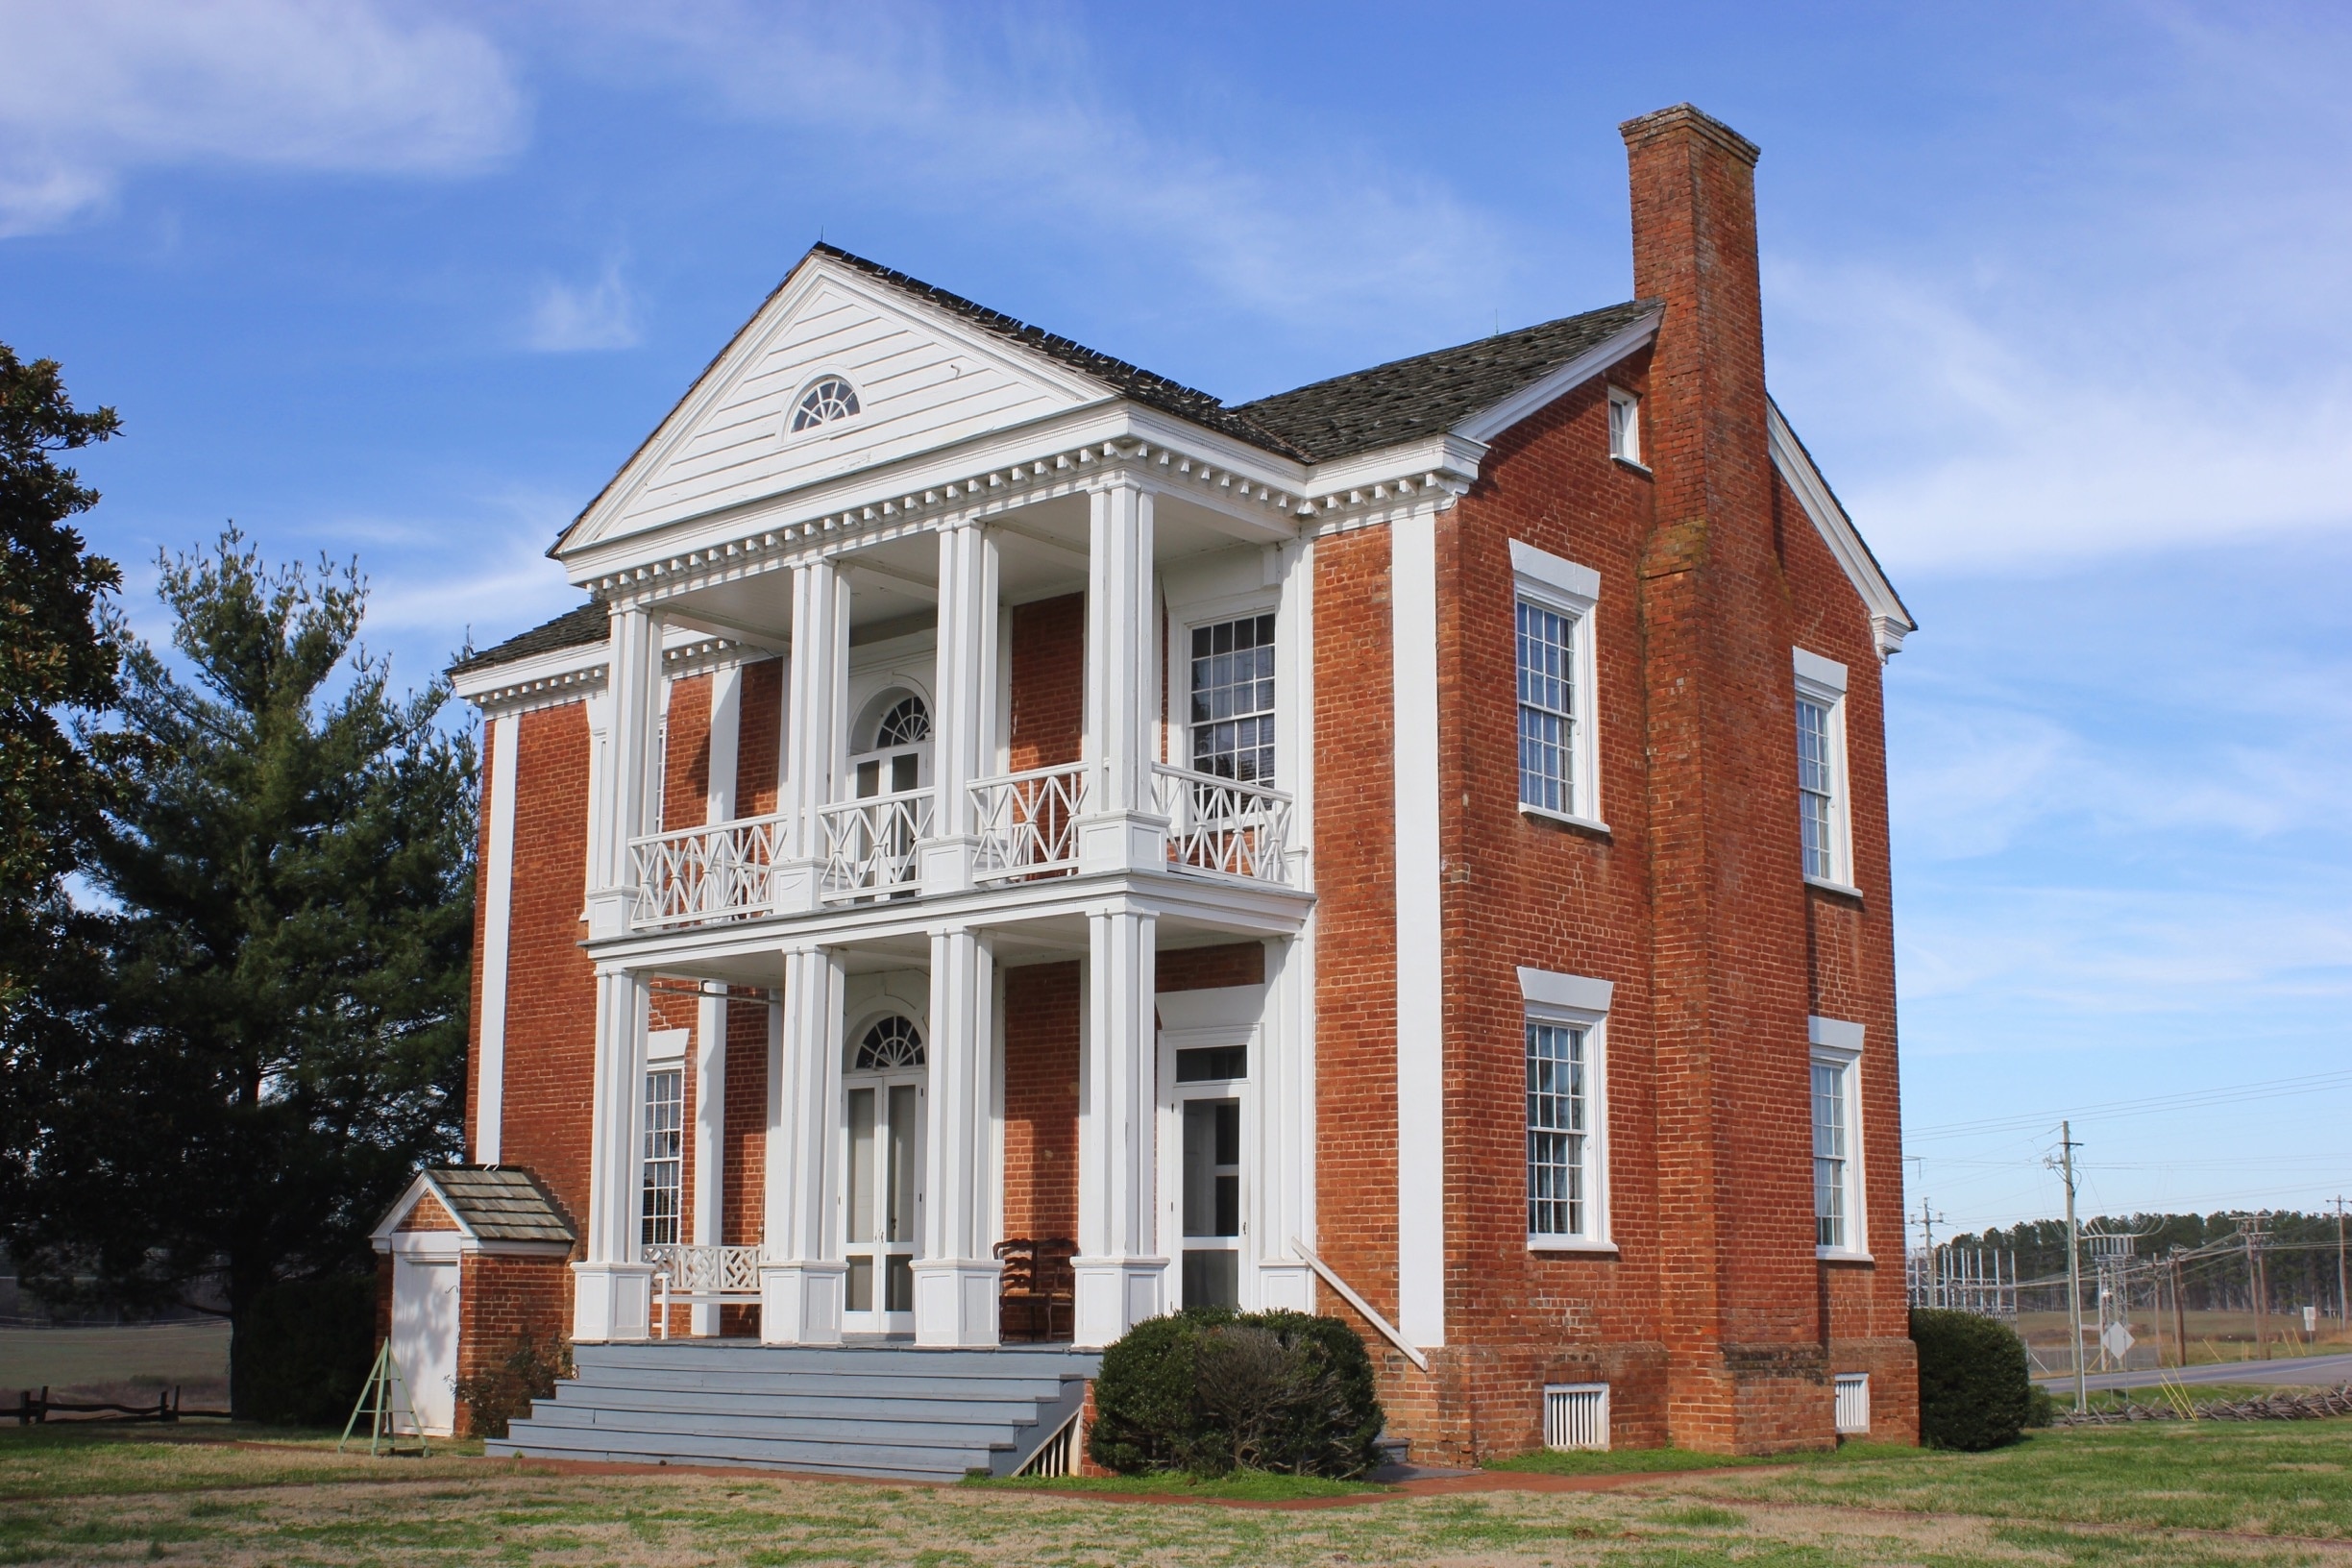 During the 1790s, James Vann became a Cherokee Indian leader and wealthy businessman.  He established the largest and most prosperous plantation in the Cherokee Nation, covering 1,000 acres of what is now Murray County. In 1804 he completed construction of a beautiful 2 ½-story brick home that was the most elegant in the Cherokee Nation. After Vann was murdered in 1809, his son Joseph inherited the mansion and plantation. Joseph was also a Cherokee leader and became even more wealthy than his father.

In the 1830s almost the entire Cherokee Nation was forced west by state and federal troops on the infamous Trail of Tears. The Vann family lost their elegant home, rebuilding in the Cherokee Territory of Oklahoma. Today the Vann House survives as Georgia’s best-preserved historic Cherokee Indian home. A guided tour allows visitors to see the house which features beautiful hand carvings, a remarkable “floating” staircase, a 12-foot mantle and fine antiques. 